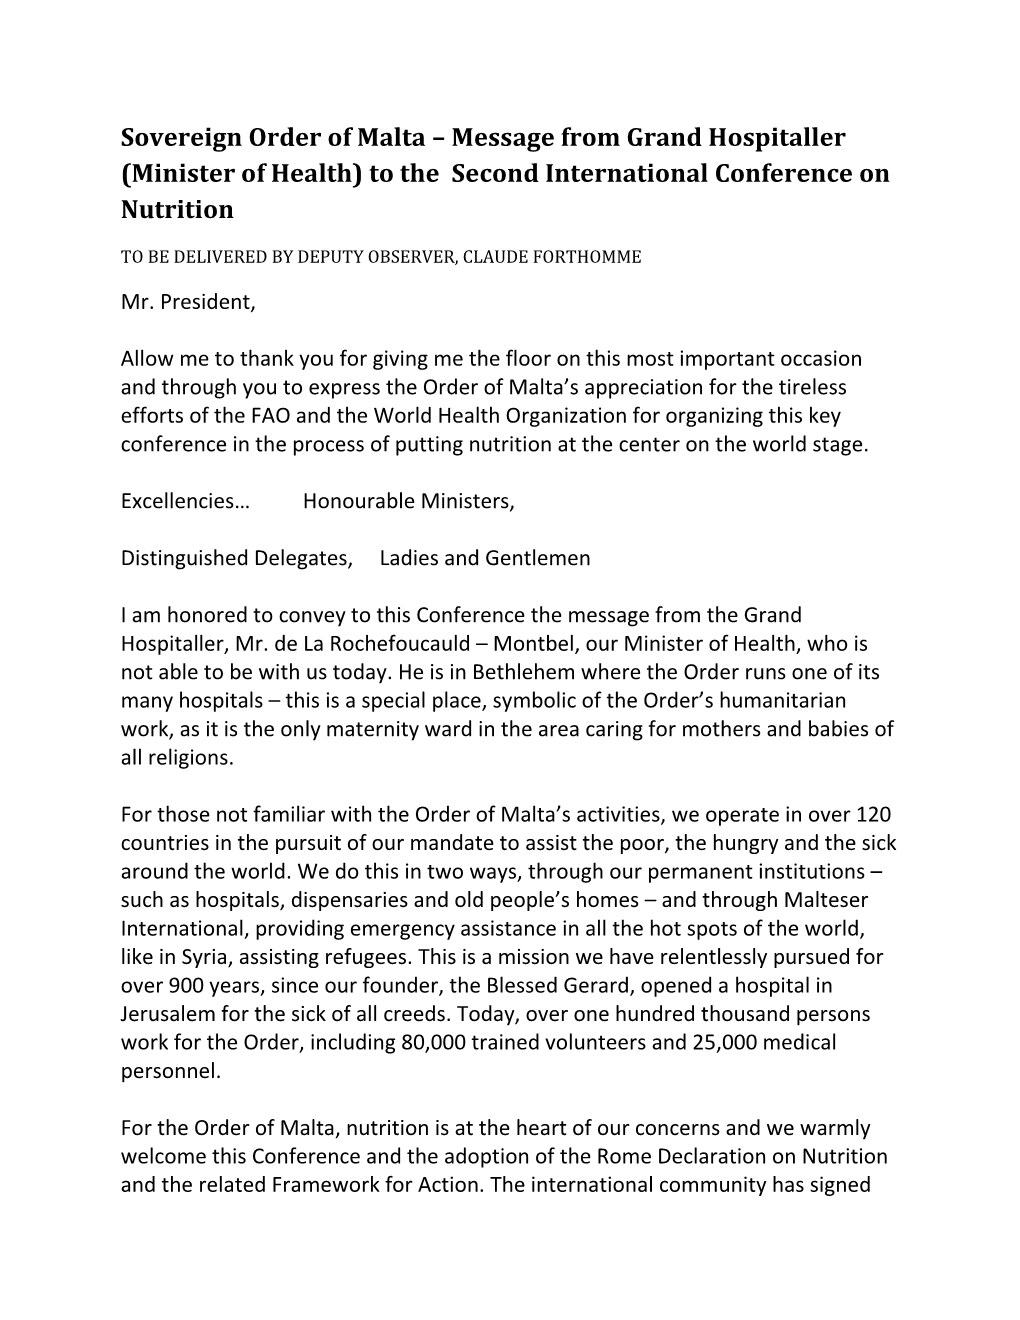 Message from Grand Hospitaller (Minister of Health) to the Second International Conference on Nutrition